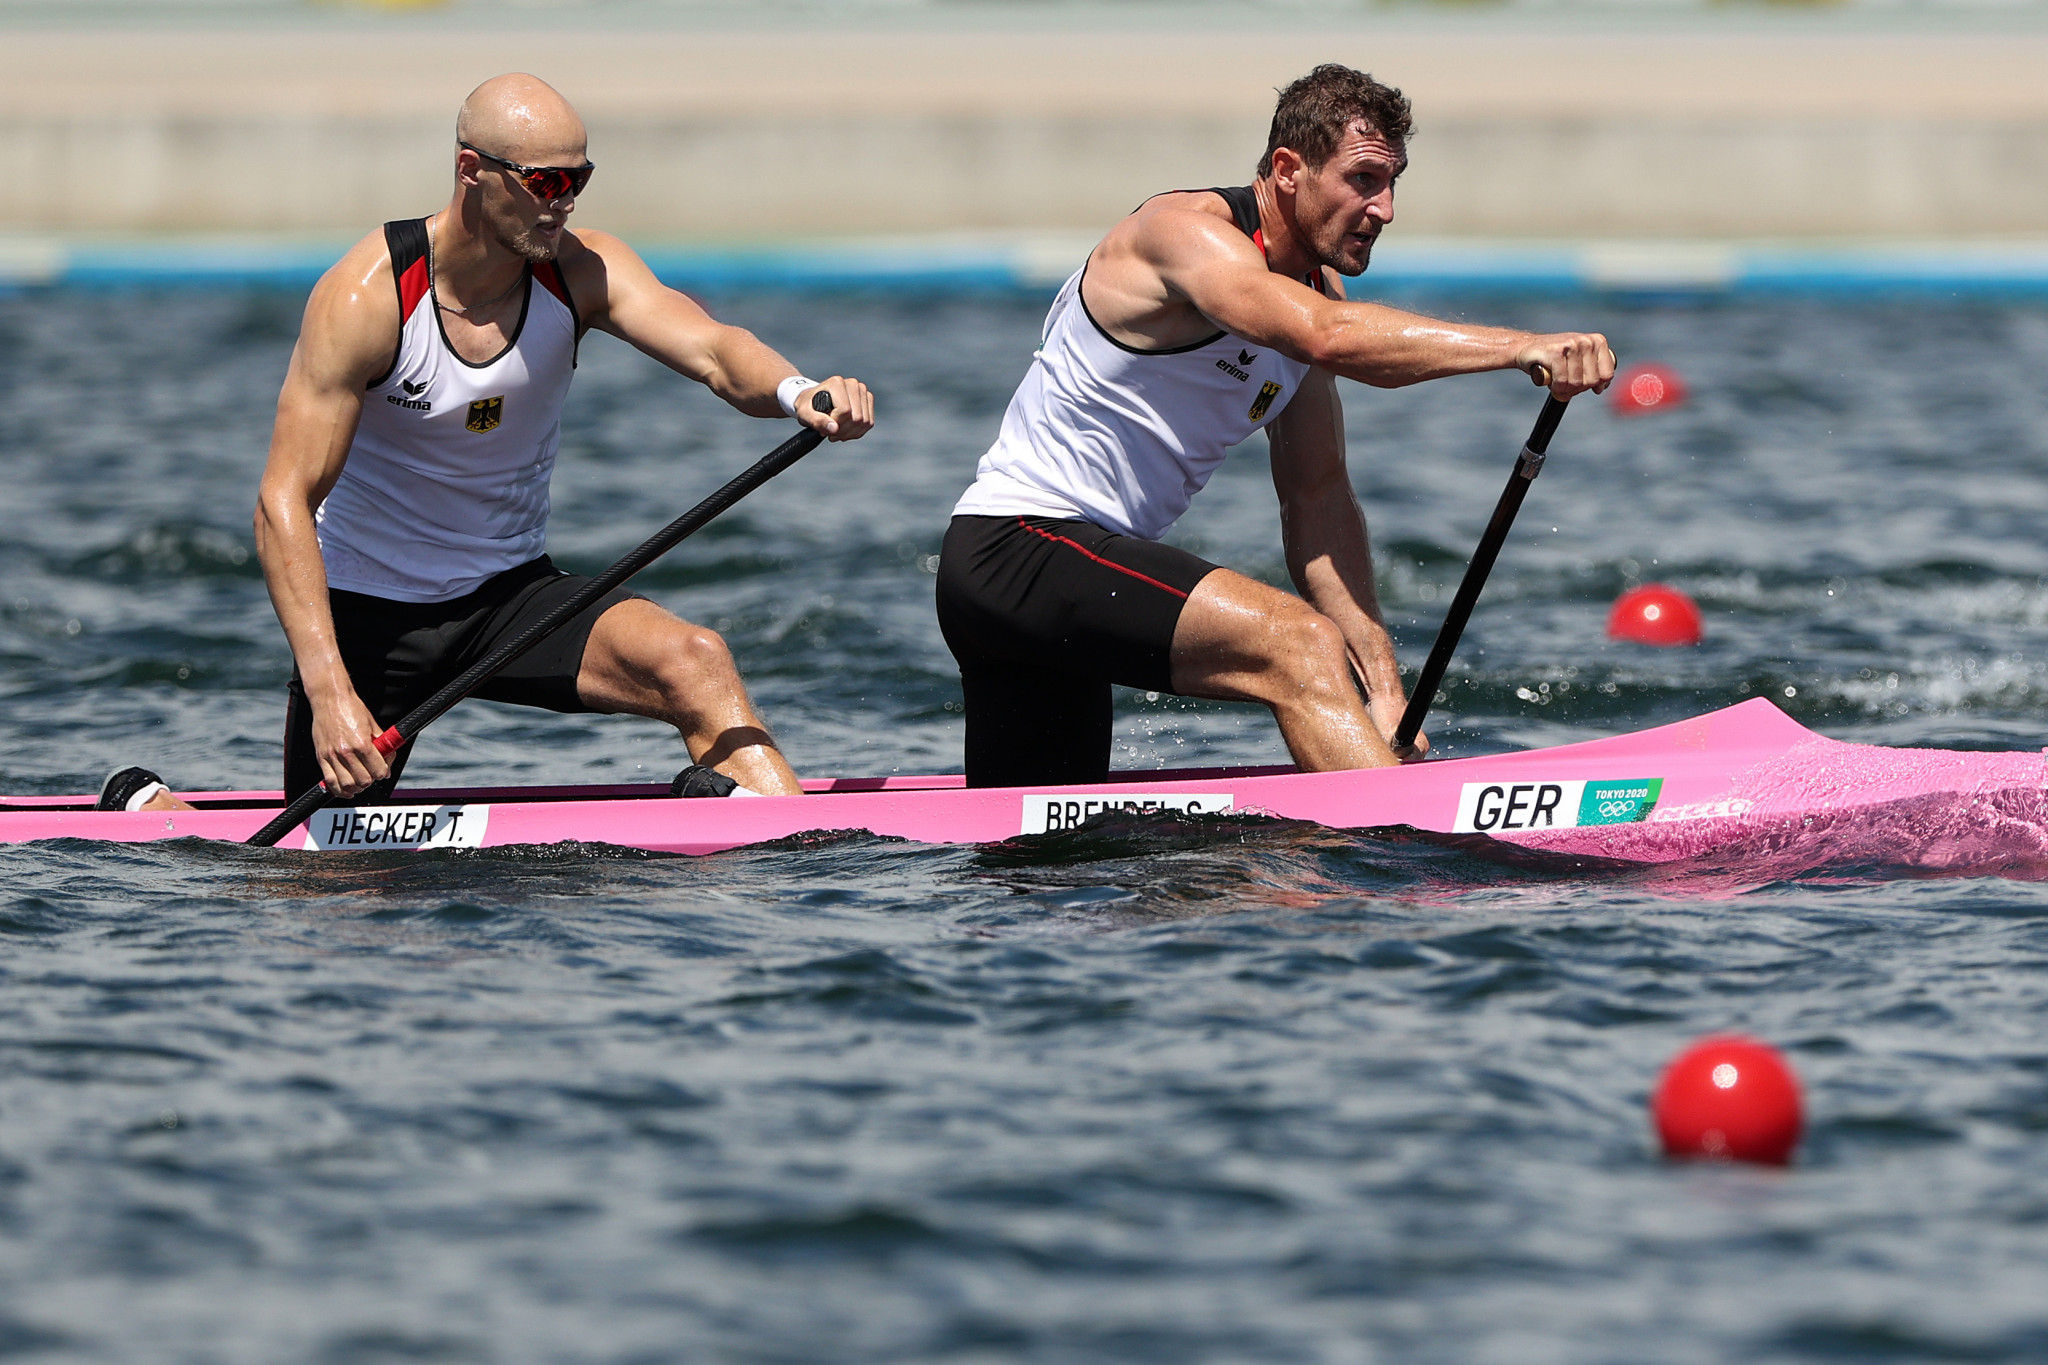 Brendel and Hecker prosper despite continued tough conditions at Canoe Sprint World Cup in Poznań